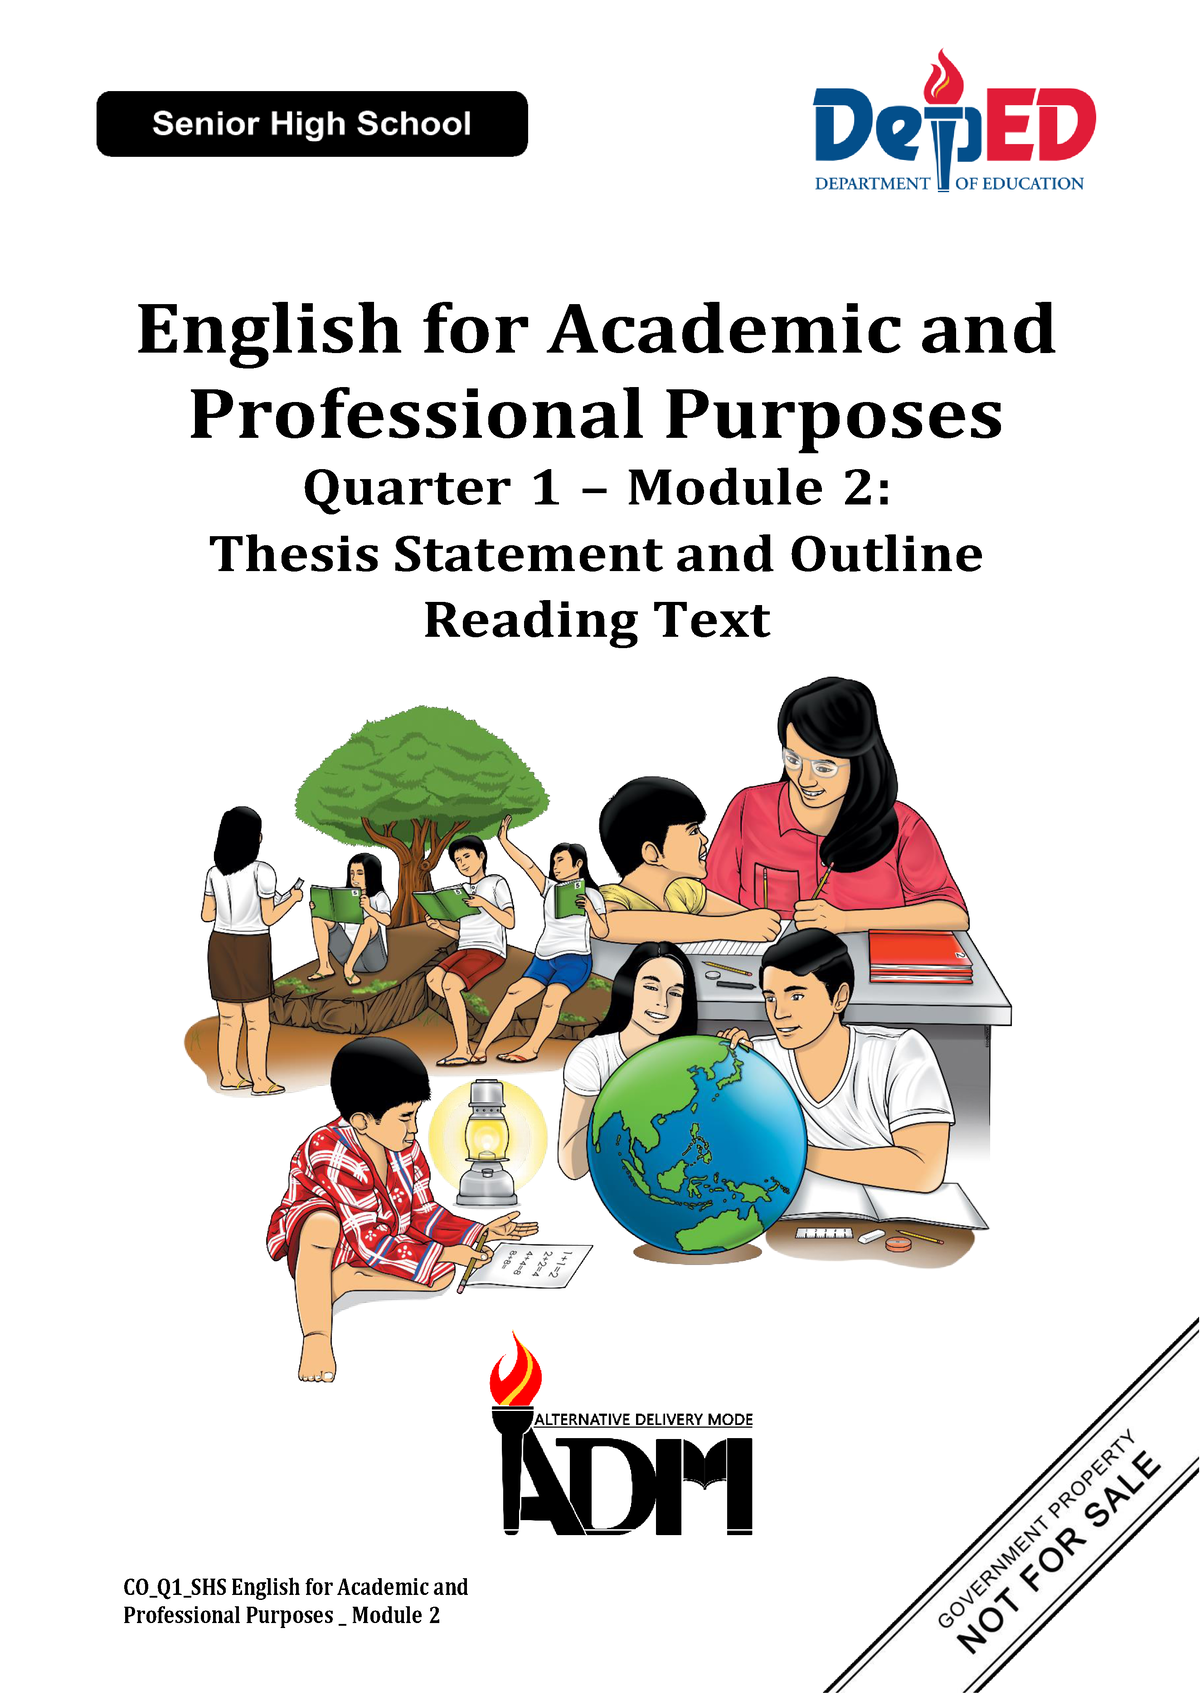 thesis driven academic text